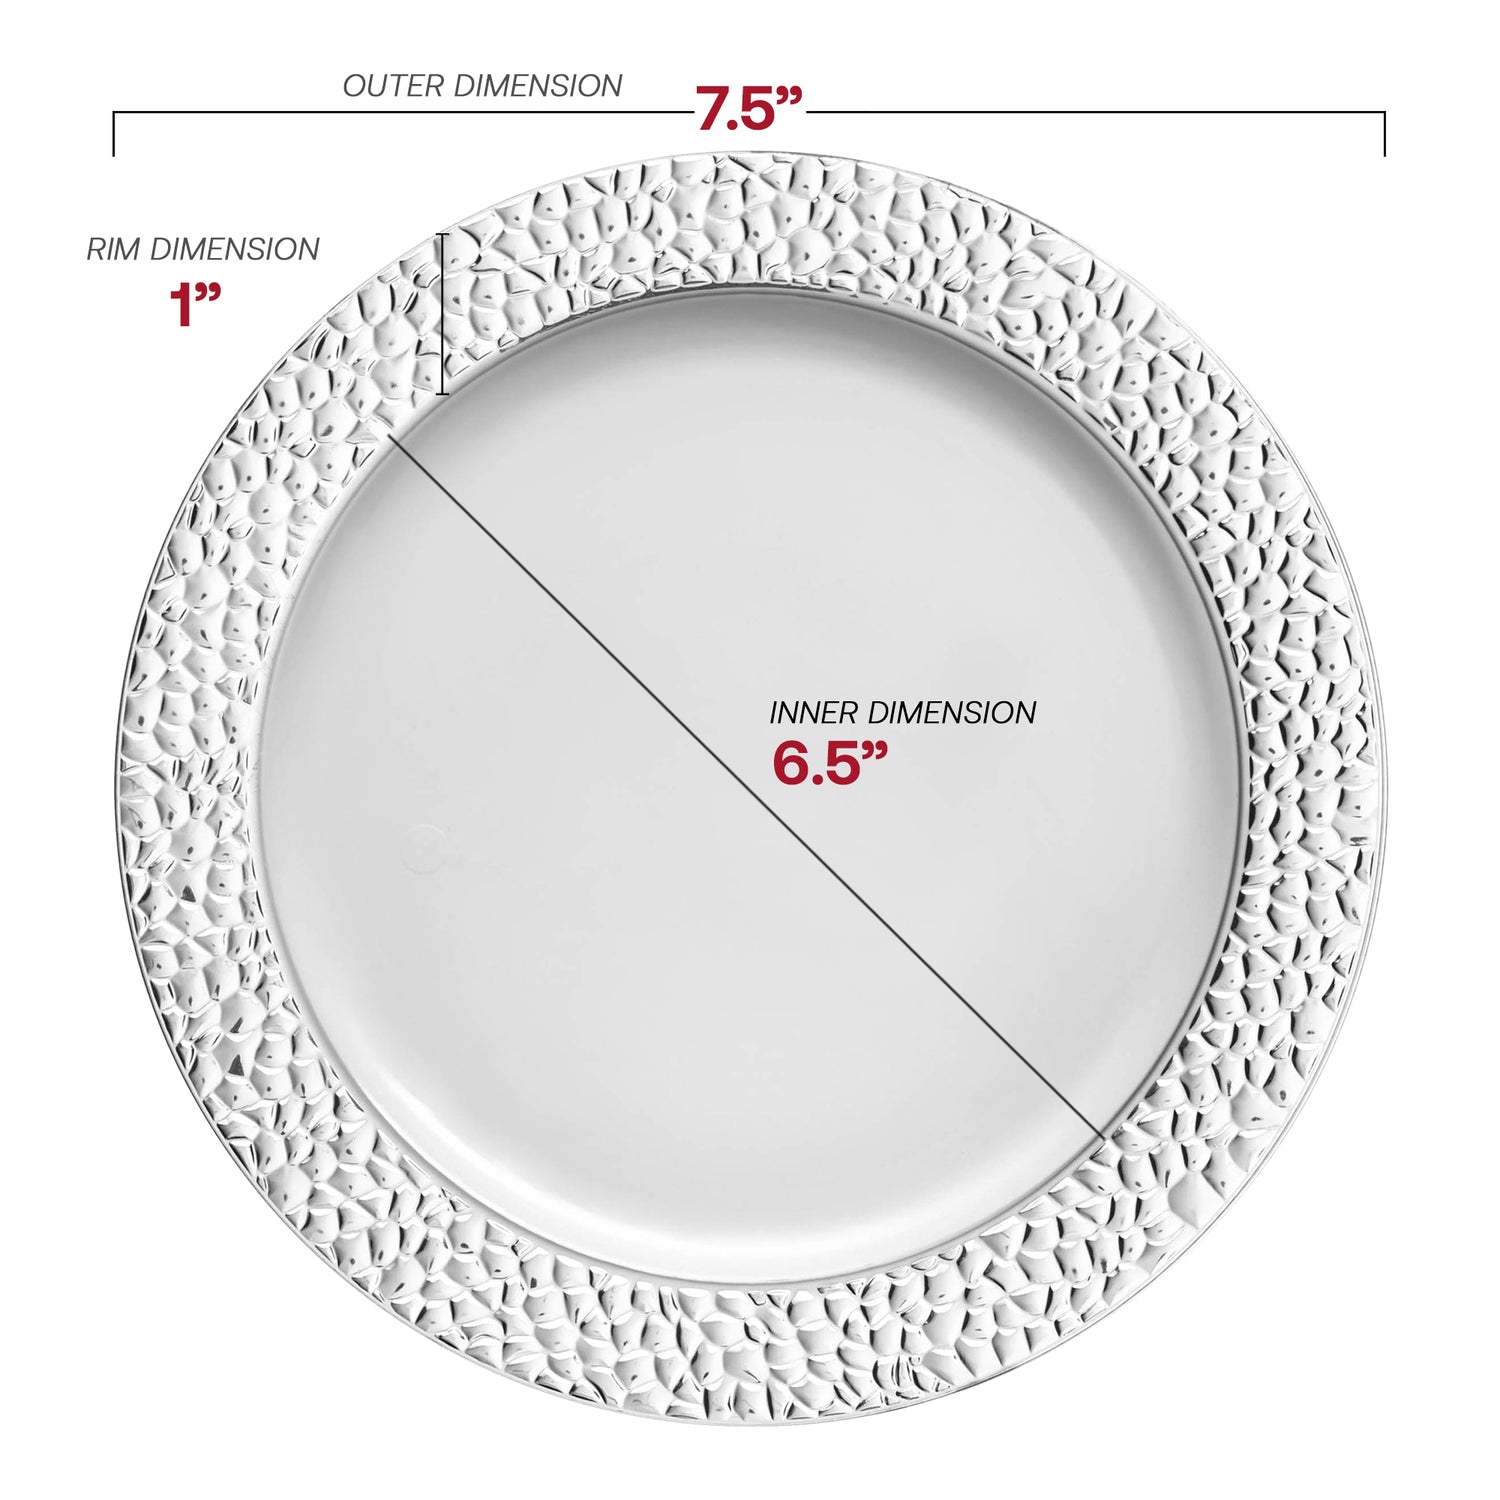 White with Silver Hammered Rim Round Plastic Appetizer/Salad Plates (7.5") Dimension | The Kaya Collection